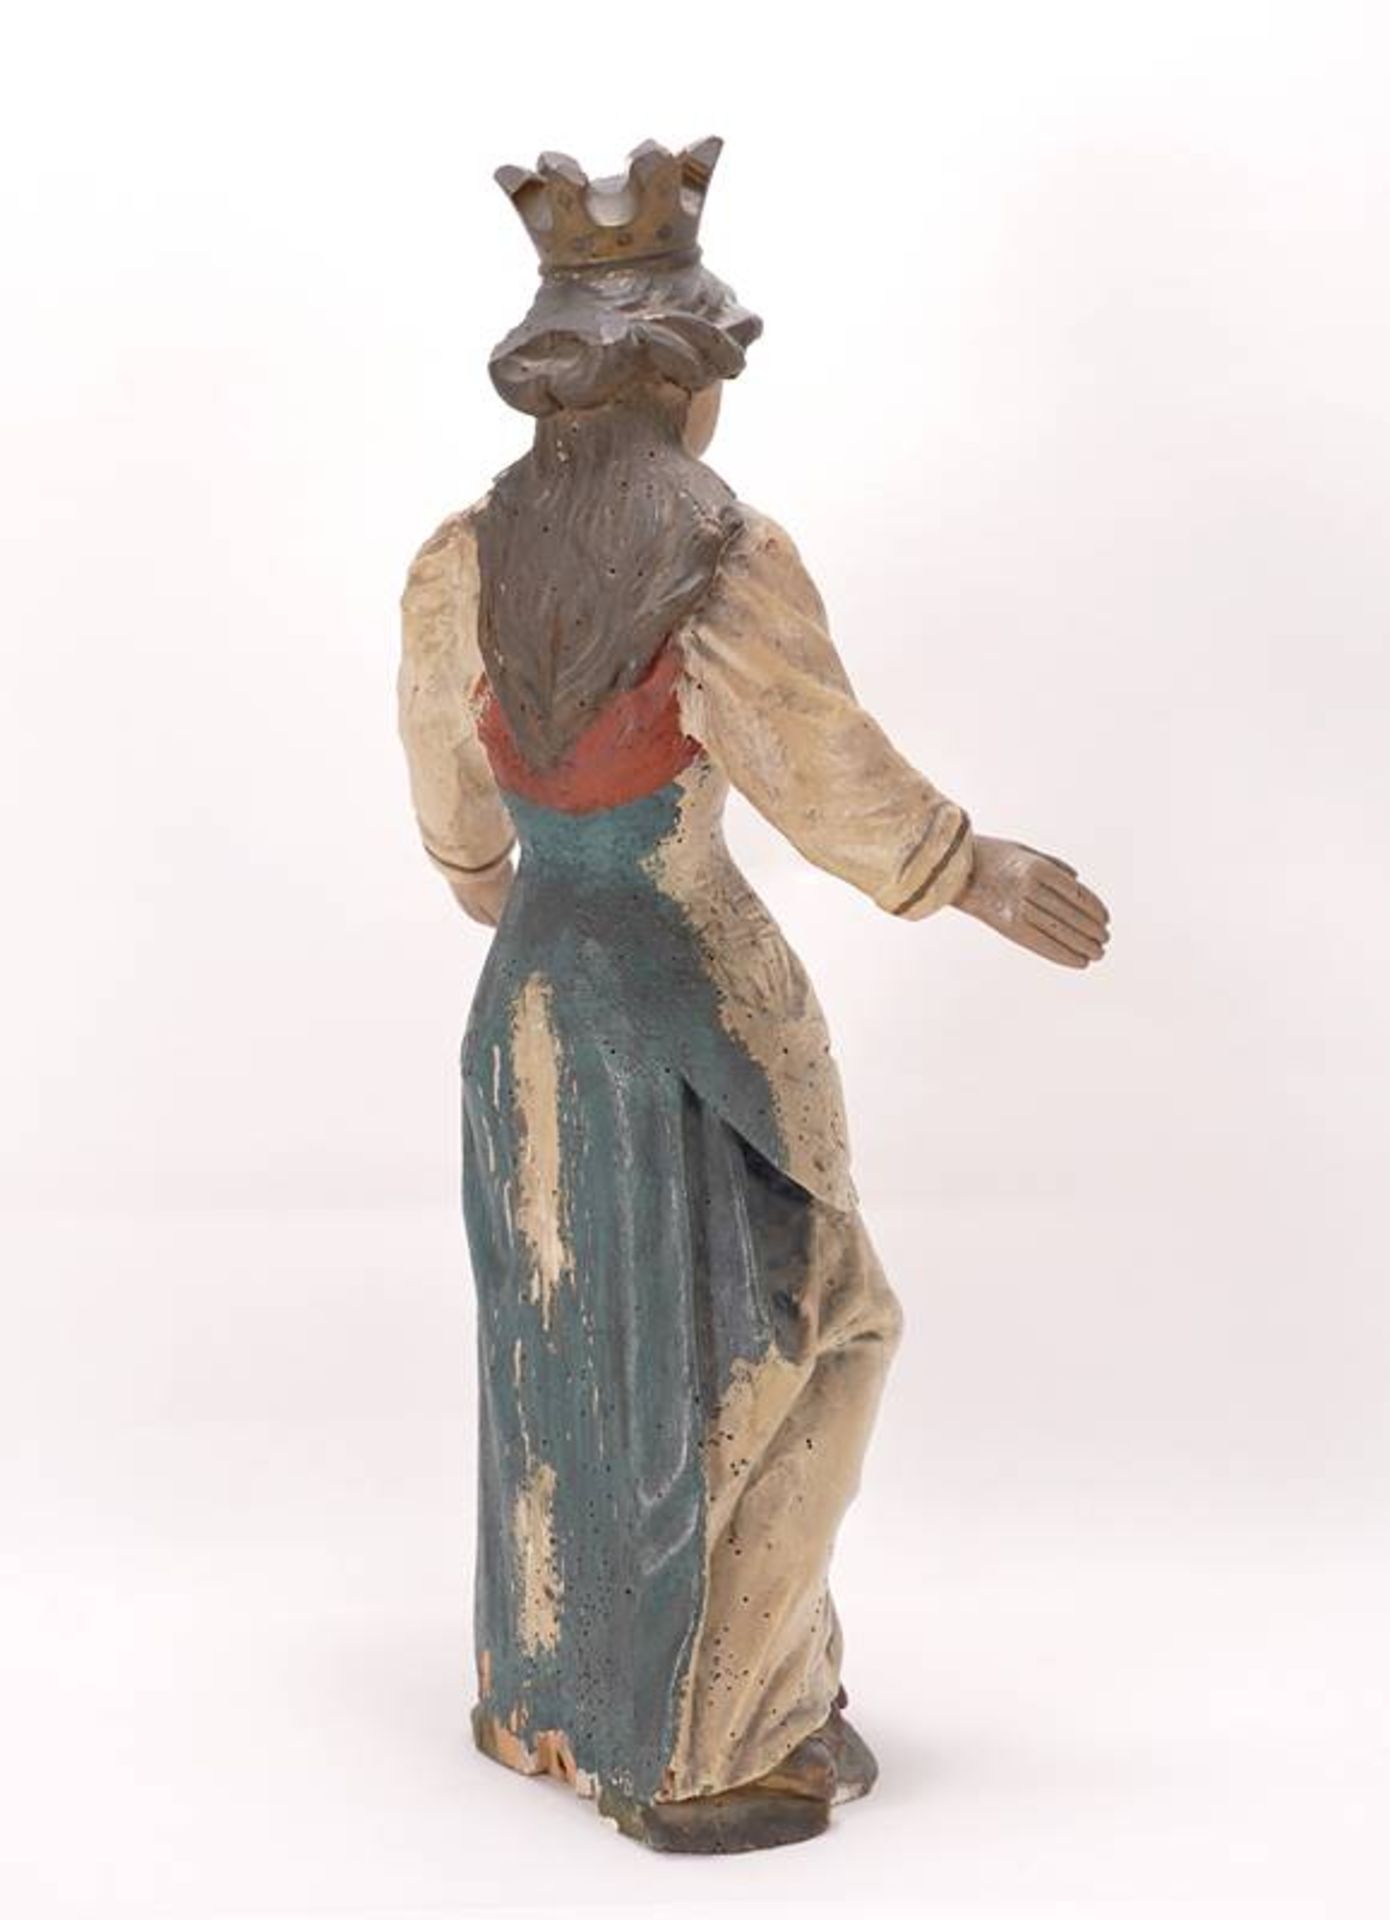 Baroque figure of a saintBaroque figure of a saint - Image 3 of 6